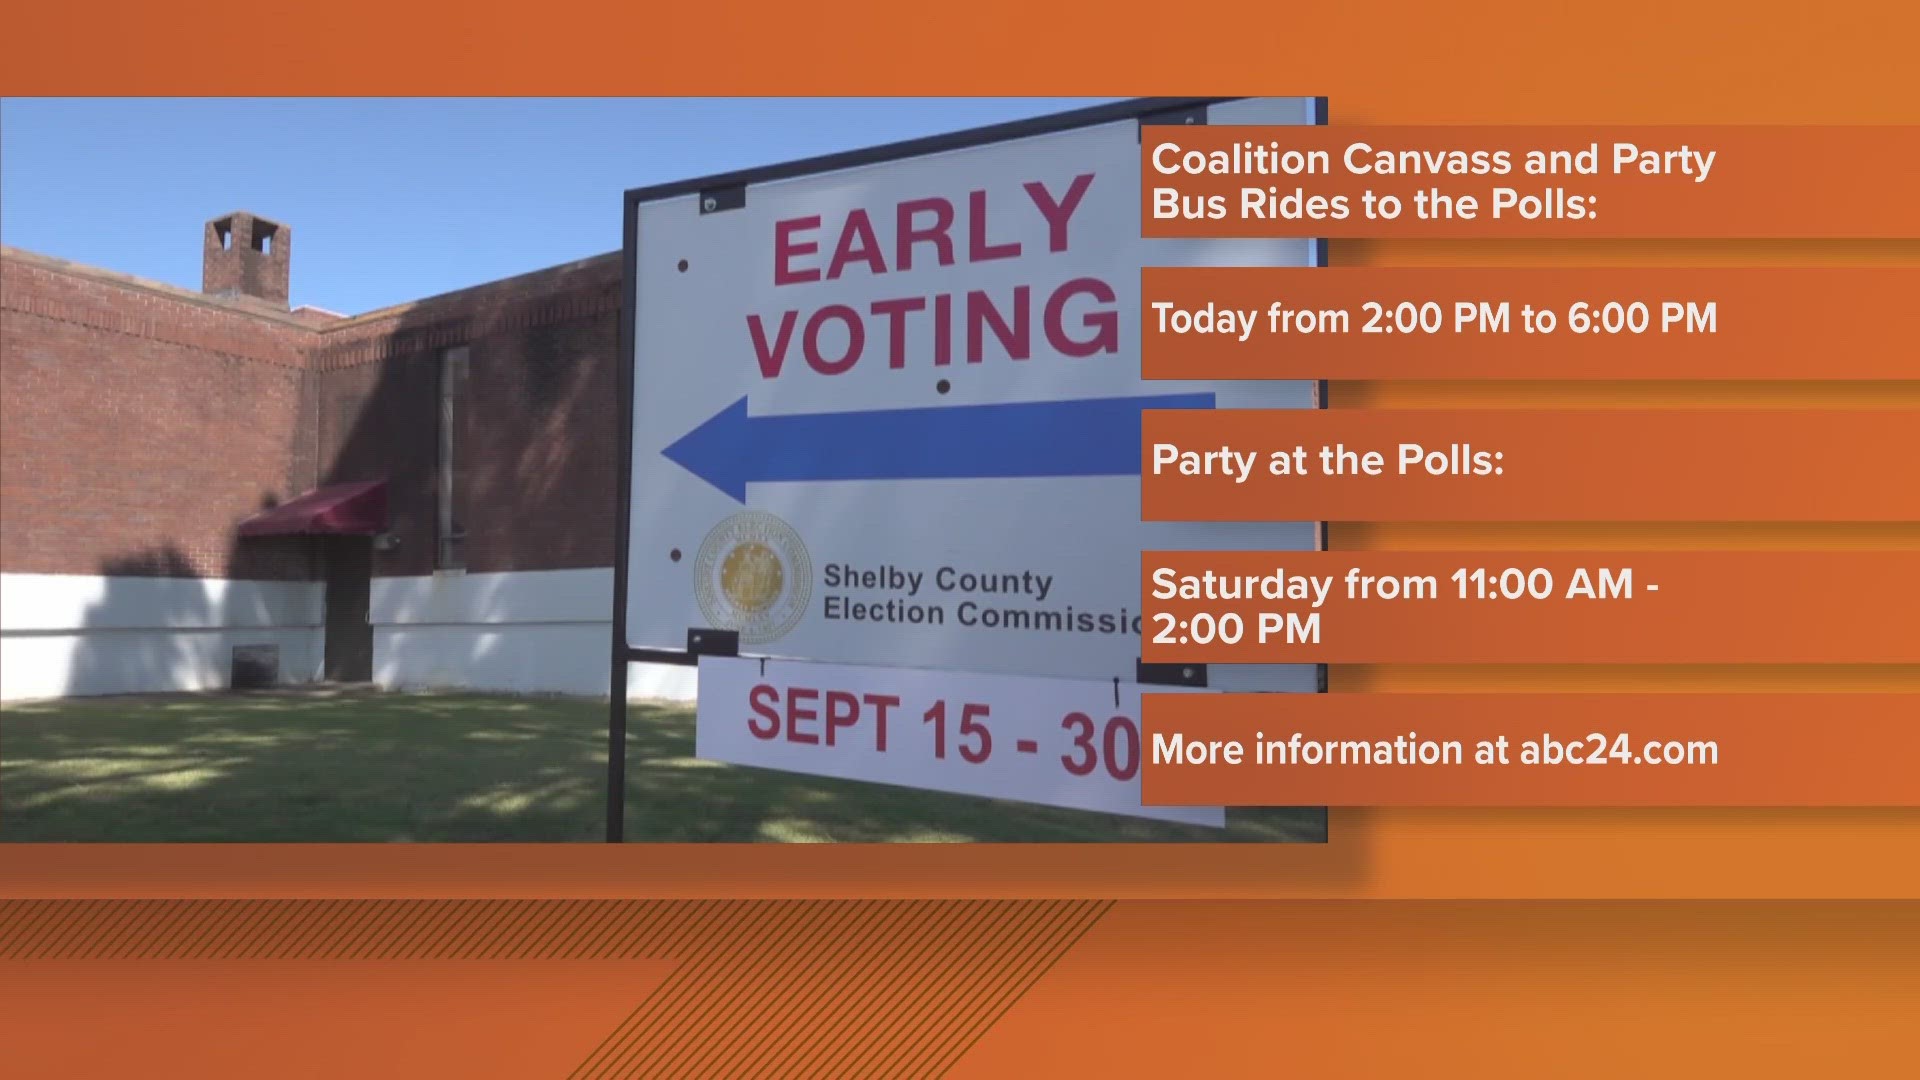 Free bus rides will be offered Thursday, Sept. 28, from 2 - 6 p.m., and a Party at the Polls event will be held the following Saturday from 11 a.m. to 2 p.m.